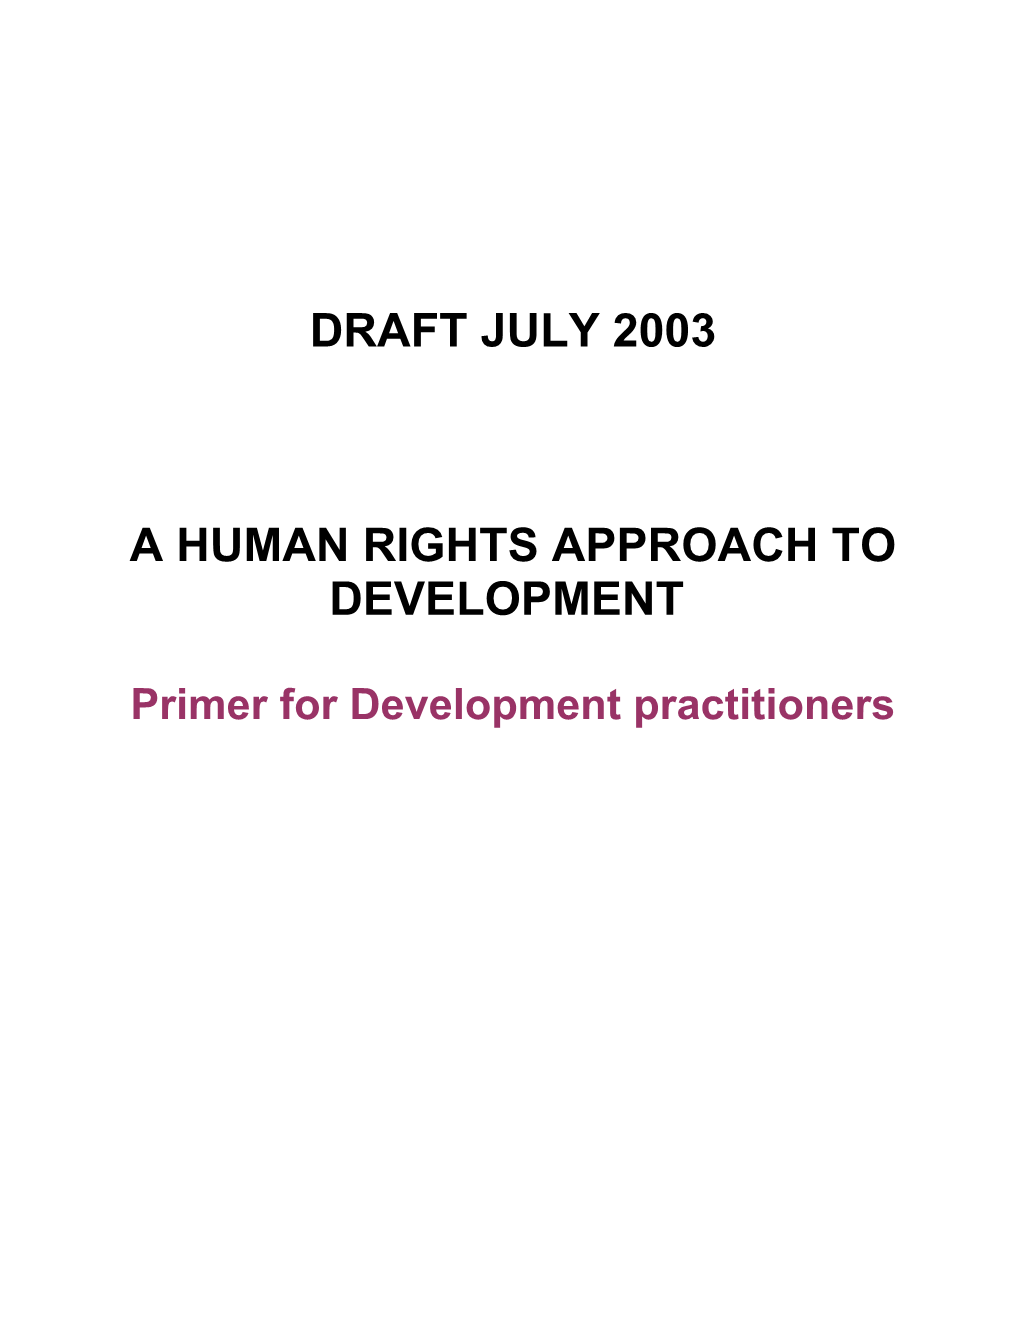 A Human Rights Approach to Development